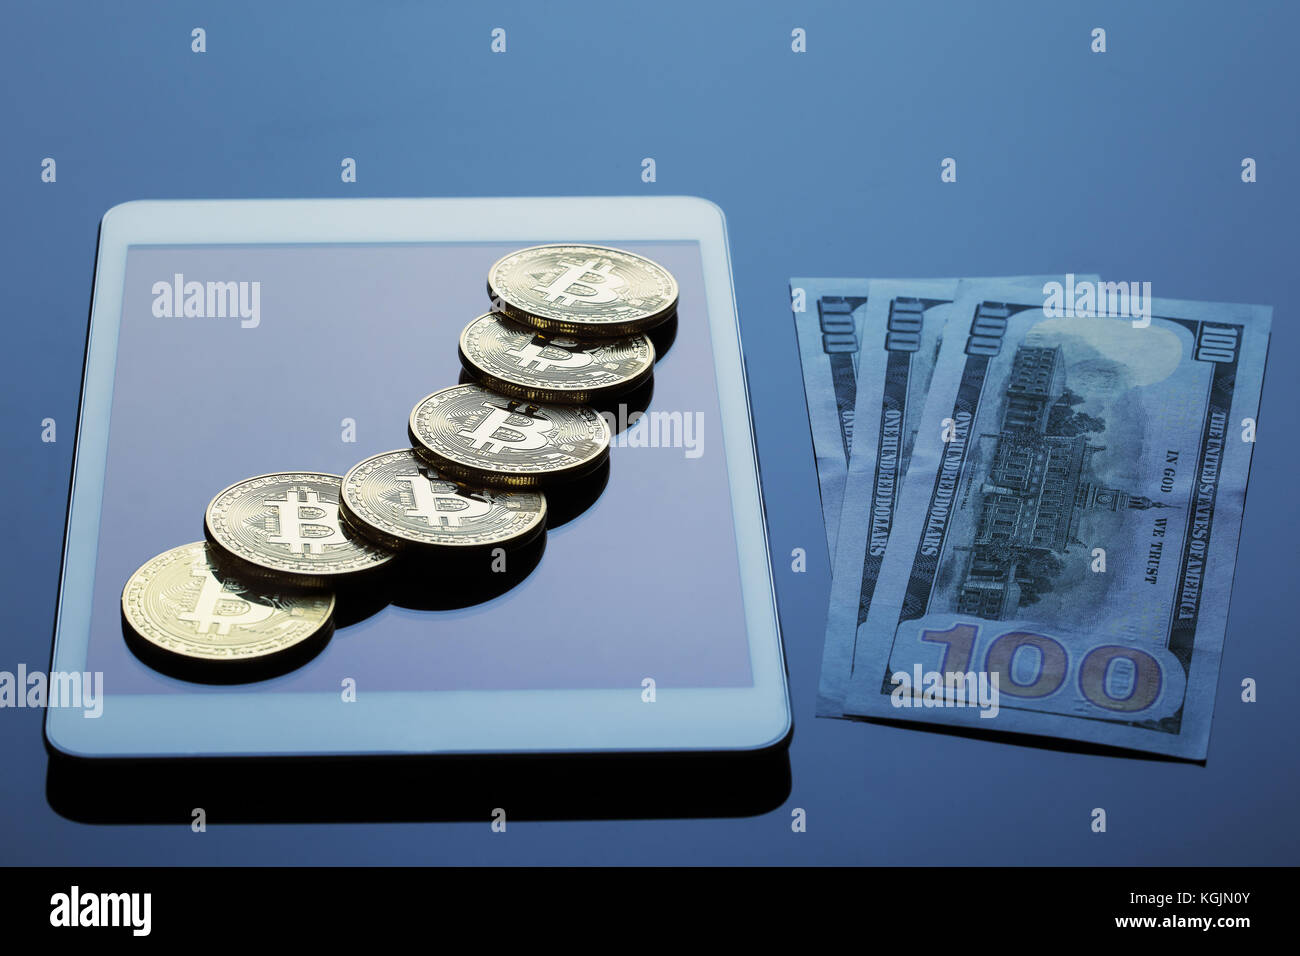 Tablet computer, bitcoins and hundred dollar bills on a dark background. The concept of virtual business and currency. Stock Photo